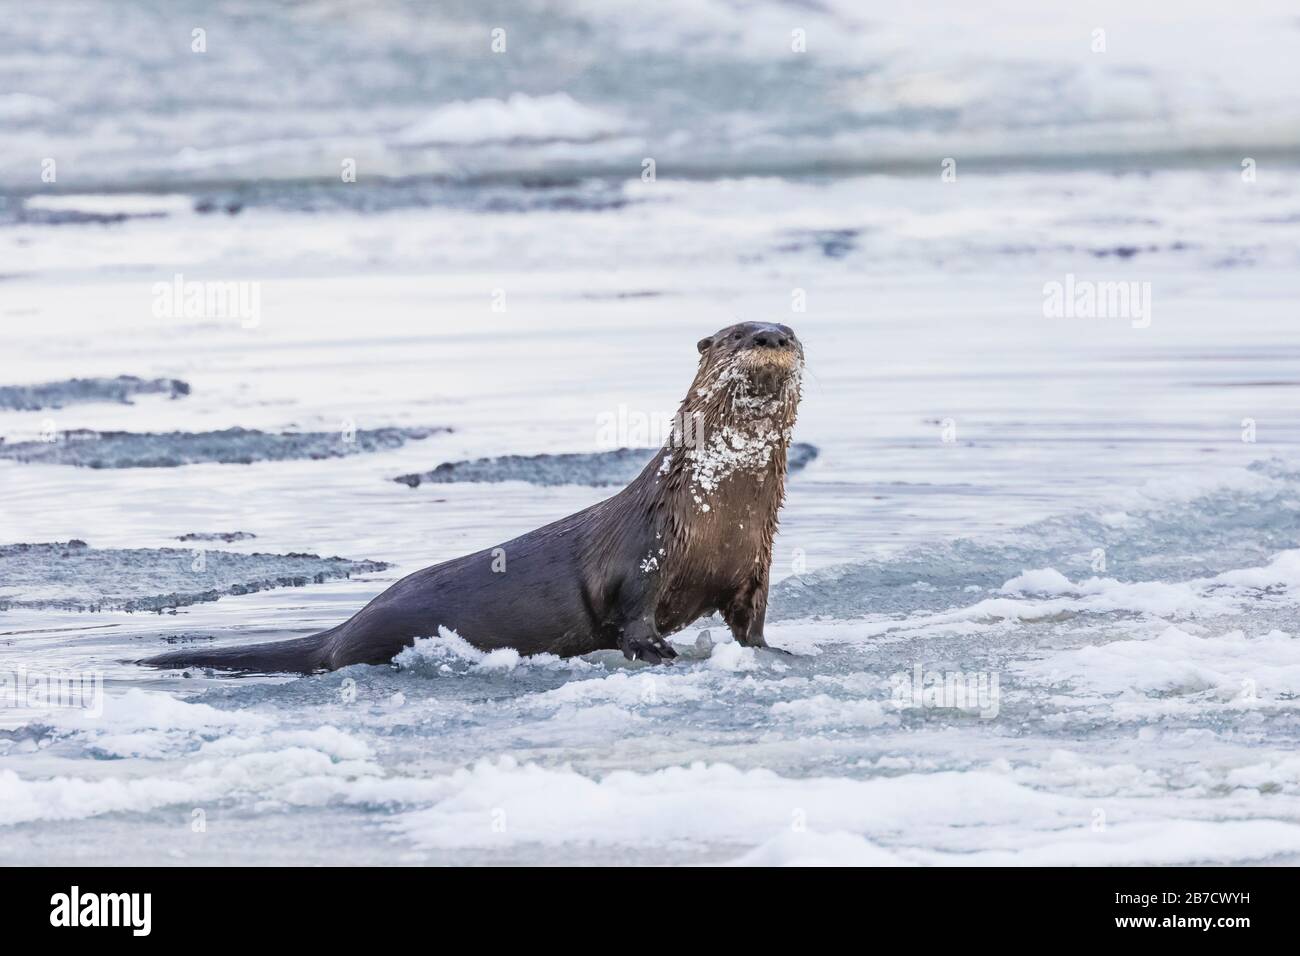 North American River Otter, Lontra canadensis, climbing onto ice floes off the beach in Trinity, Newfoundland, Canada Stock Photo